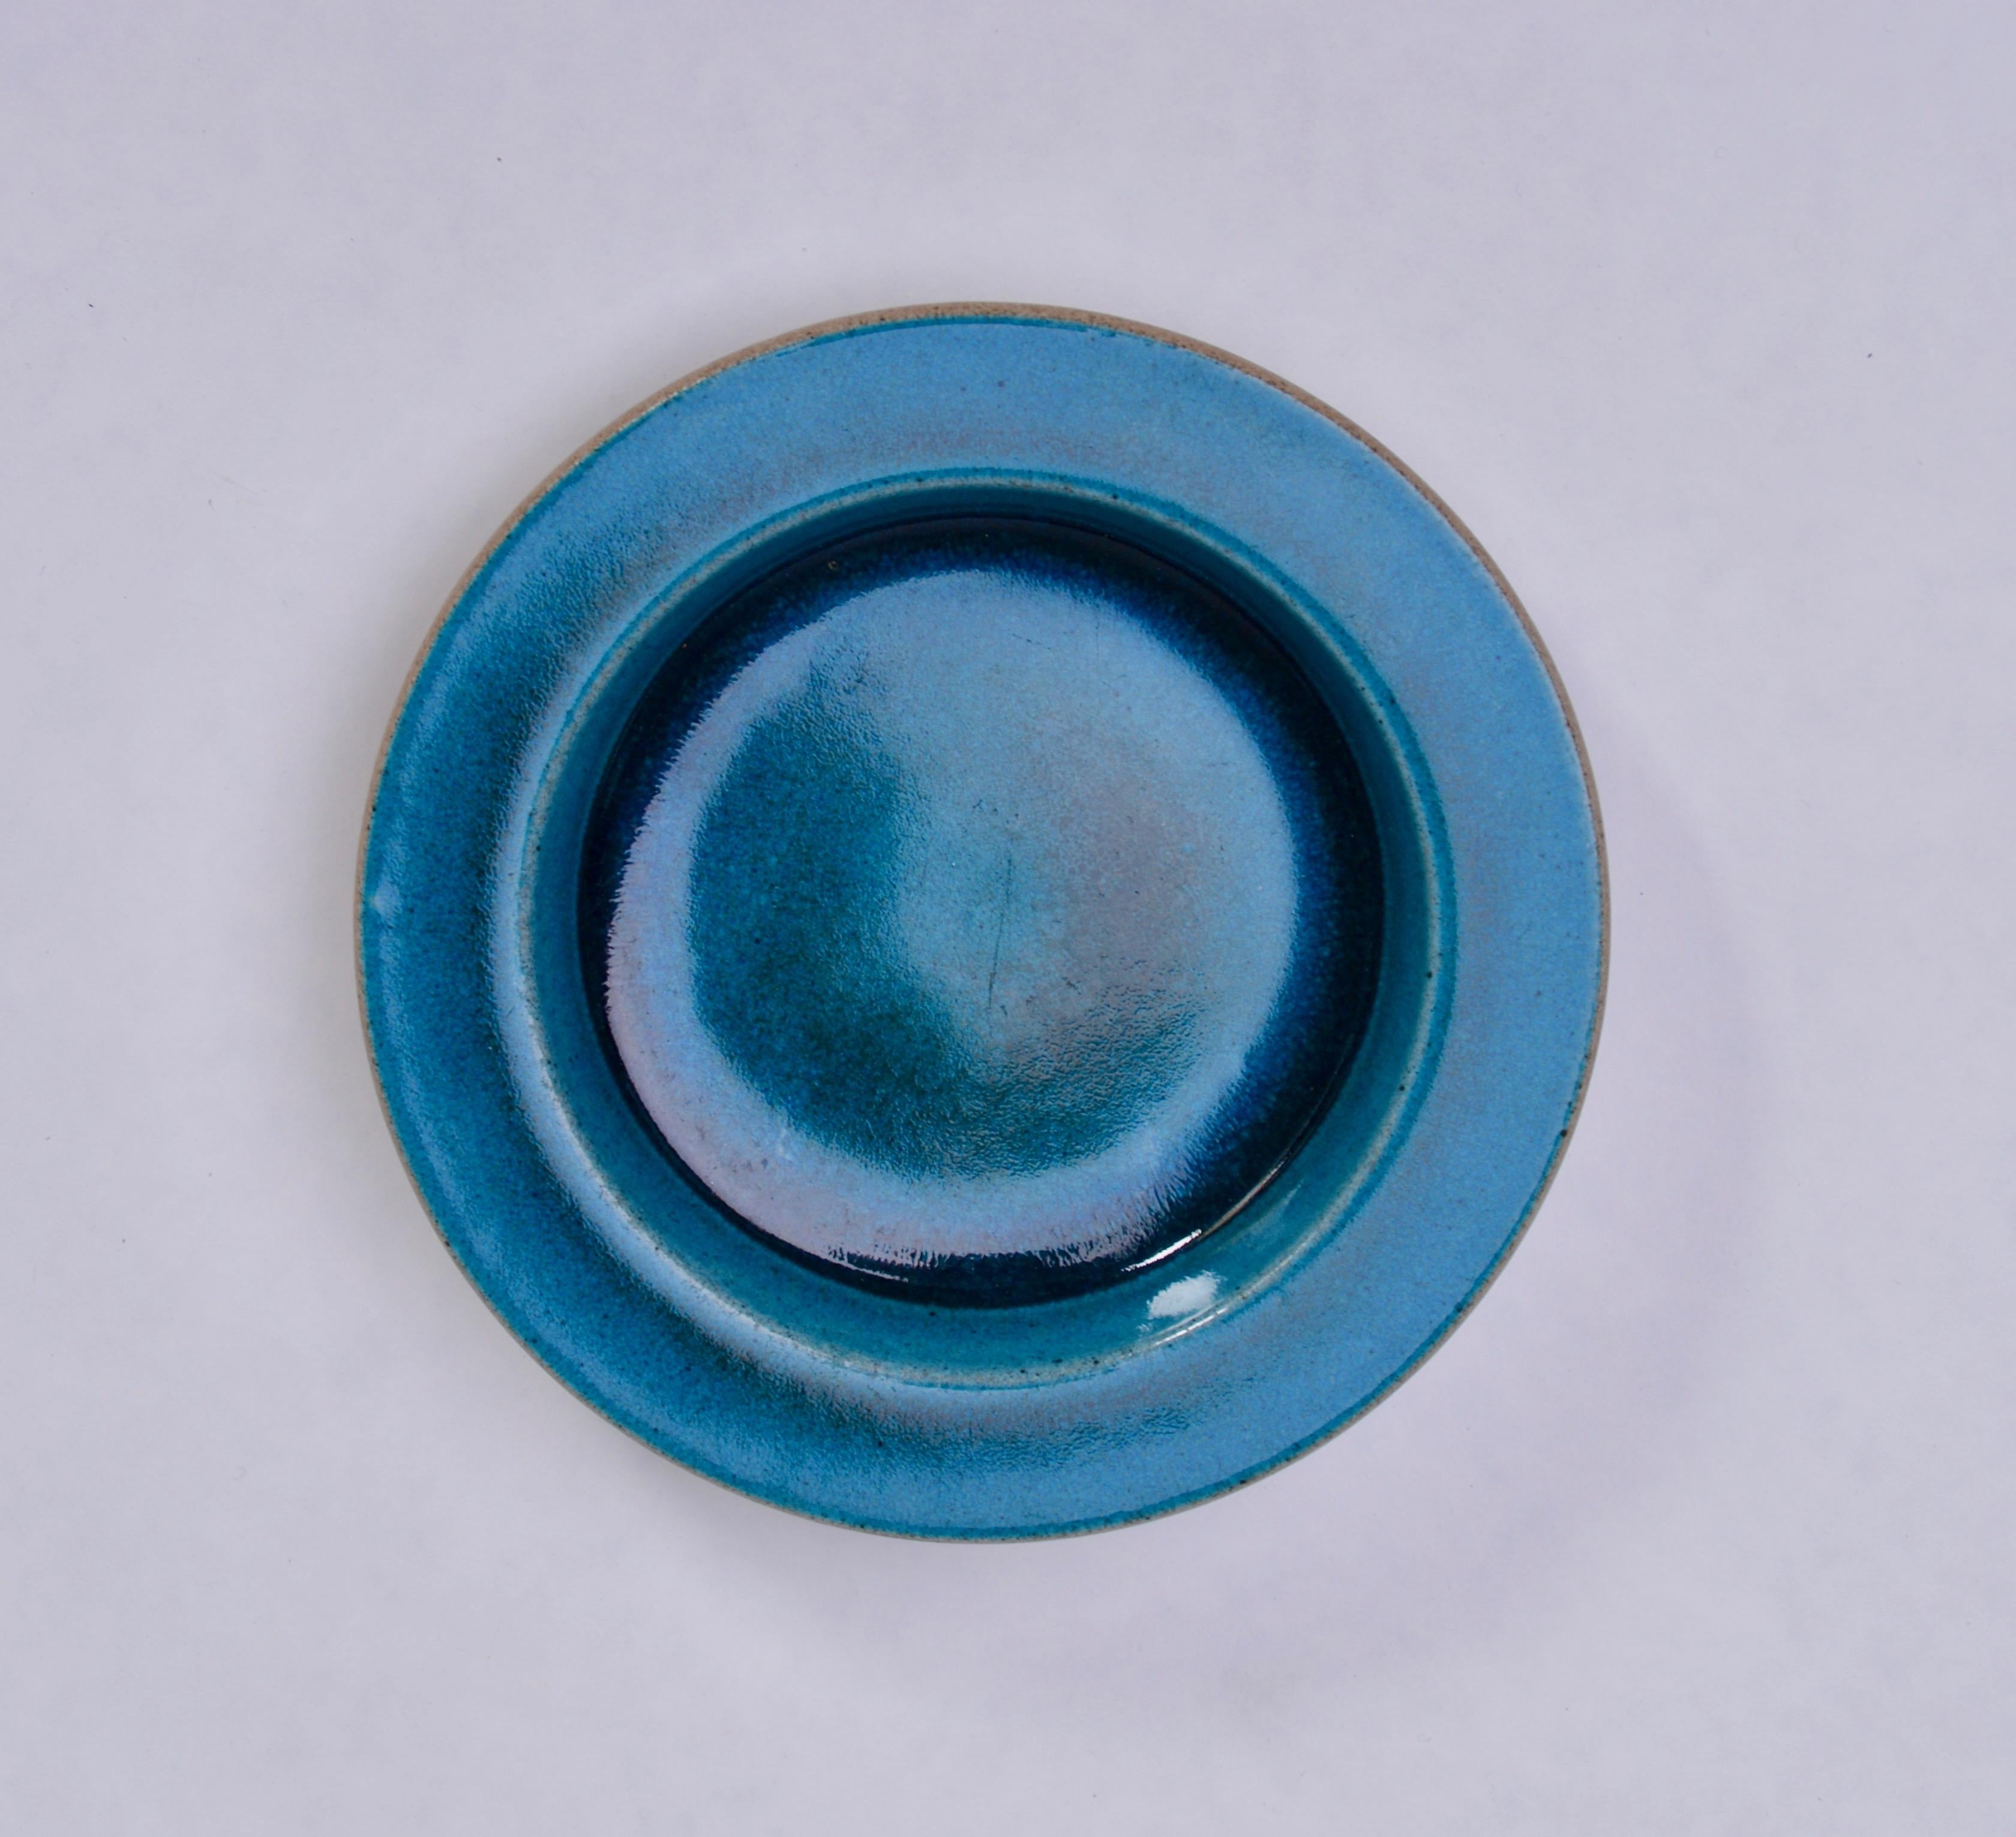 Blue Mid-Century Modern stoneware plate by Atelier Knabstrup
Stoneware plate with beautiful ceramic glazing in different tones of blue. Produced by Danish company Knabstrup Atelier.